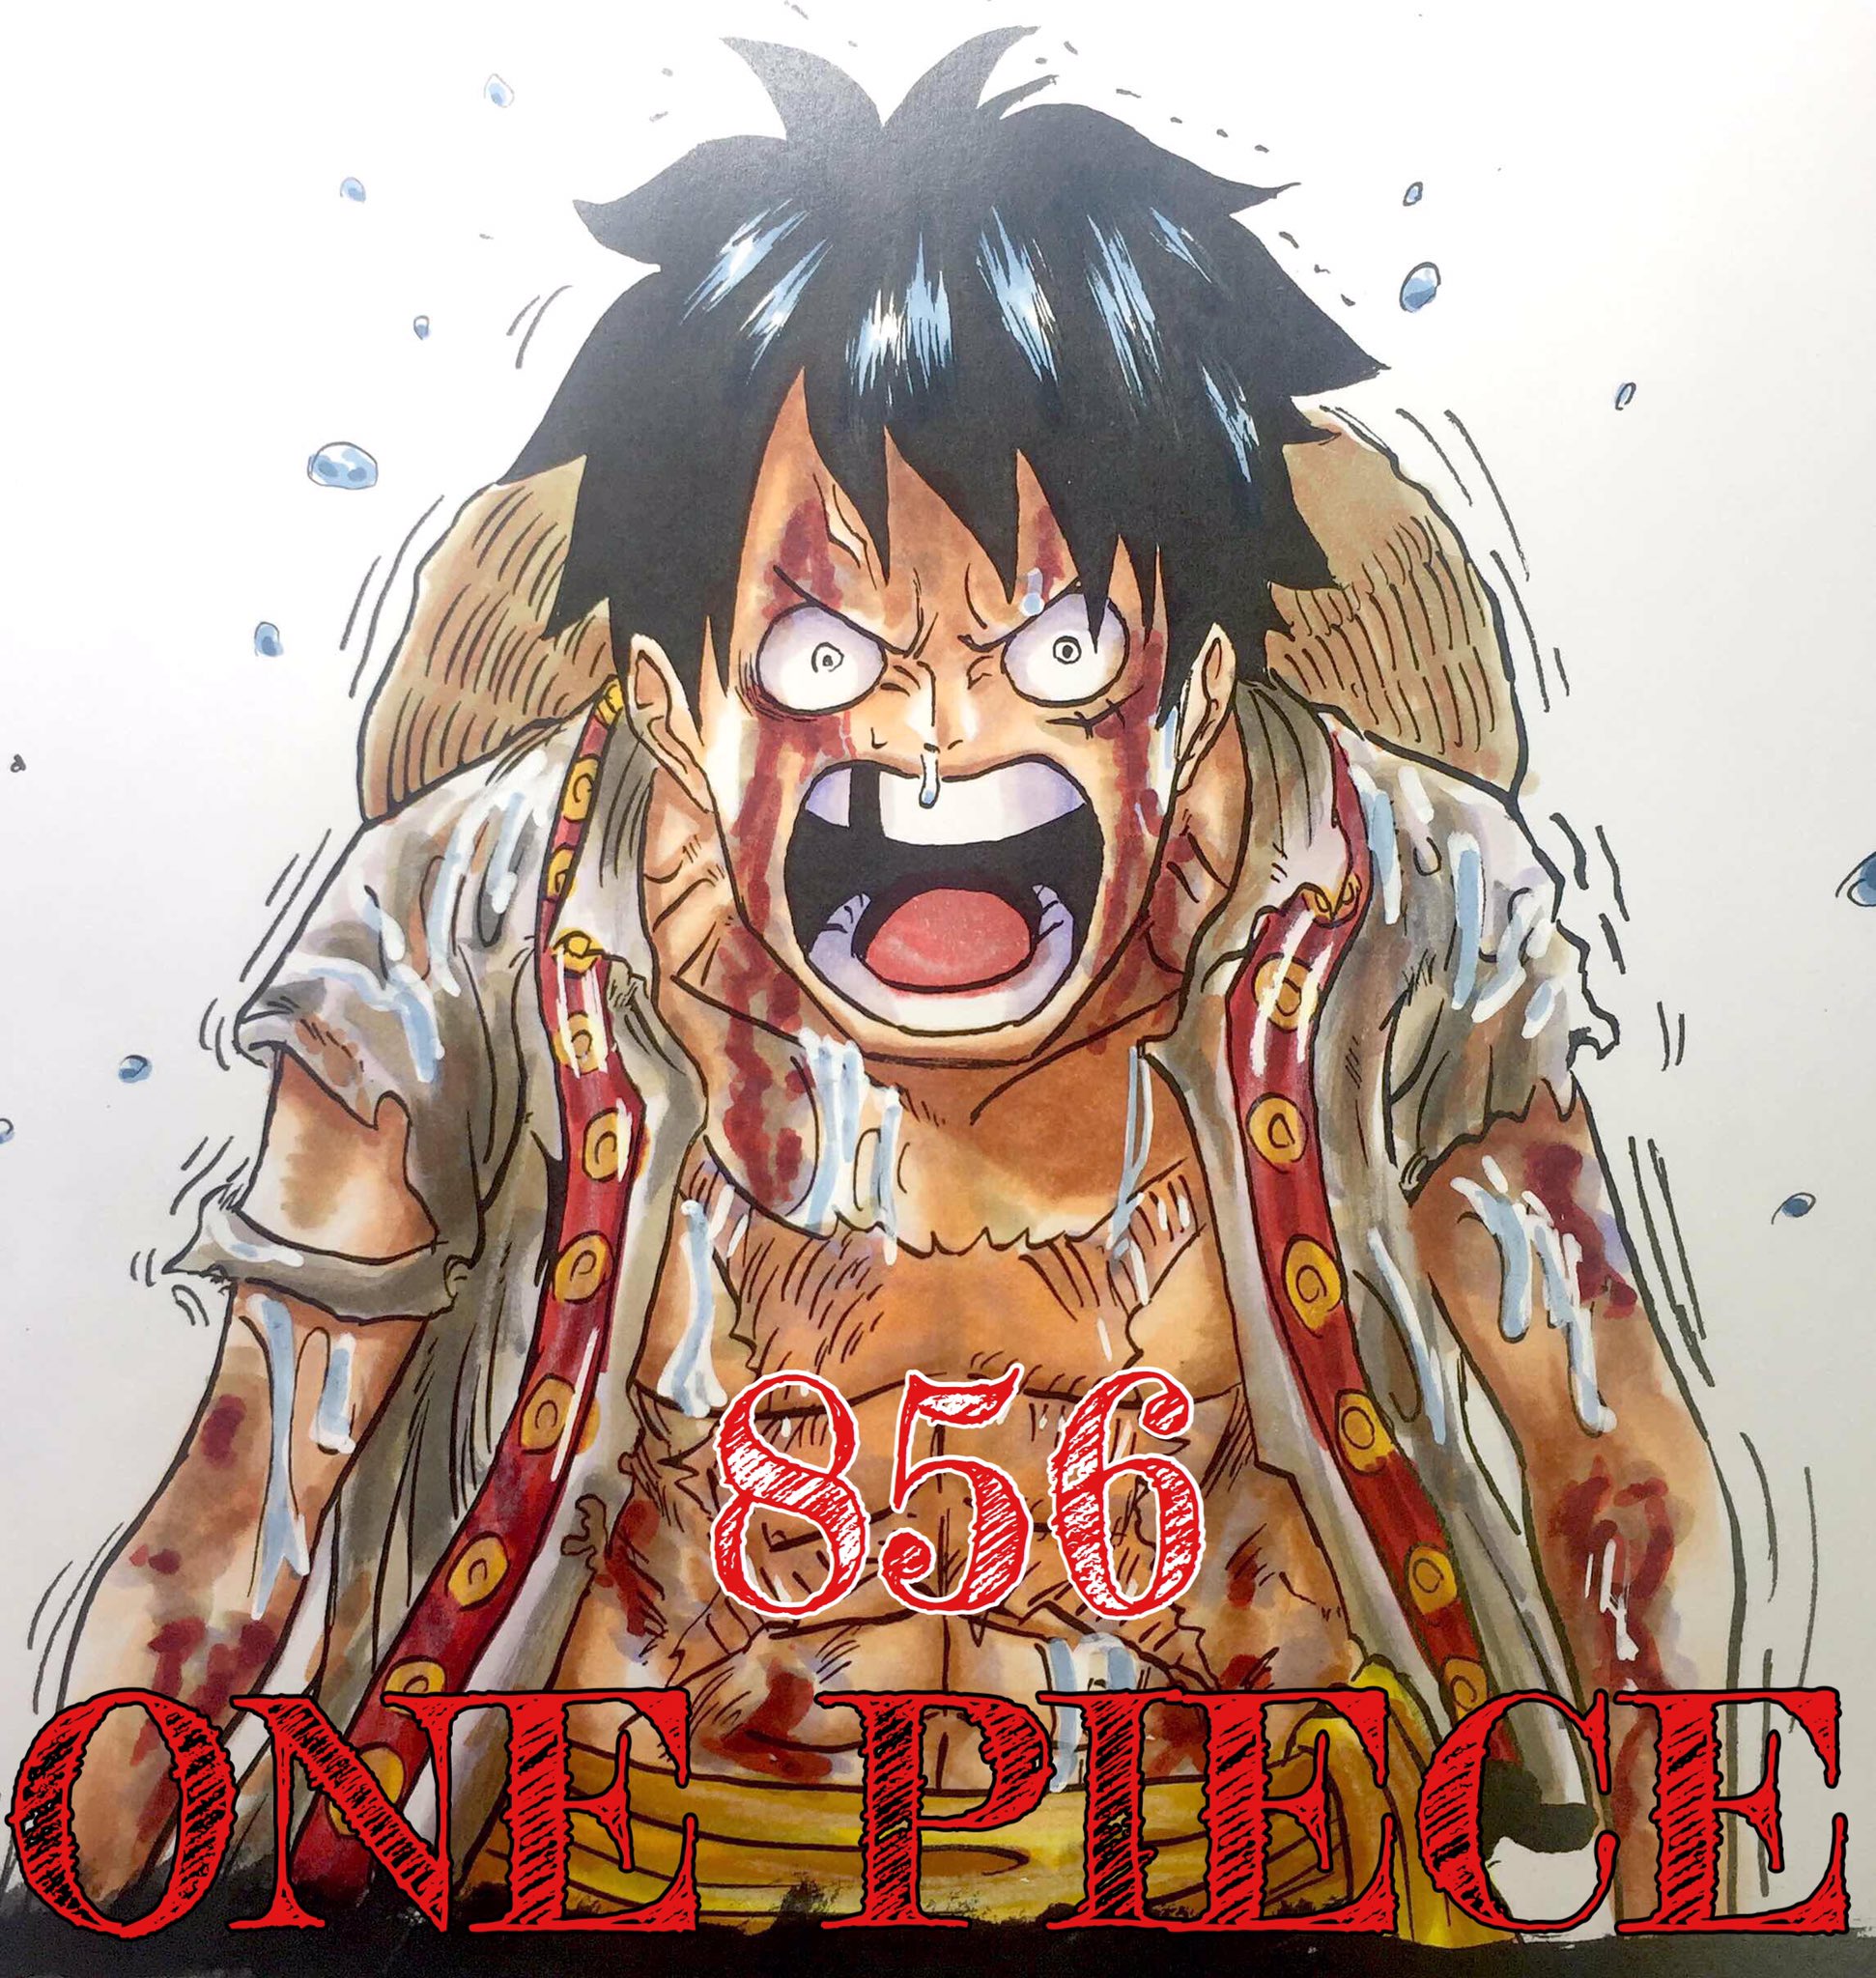 Hatsu S Colorpage 本心を言えよ One Piece 第856話 ウソつき より T Co 5d57xqx7ad Twitter